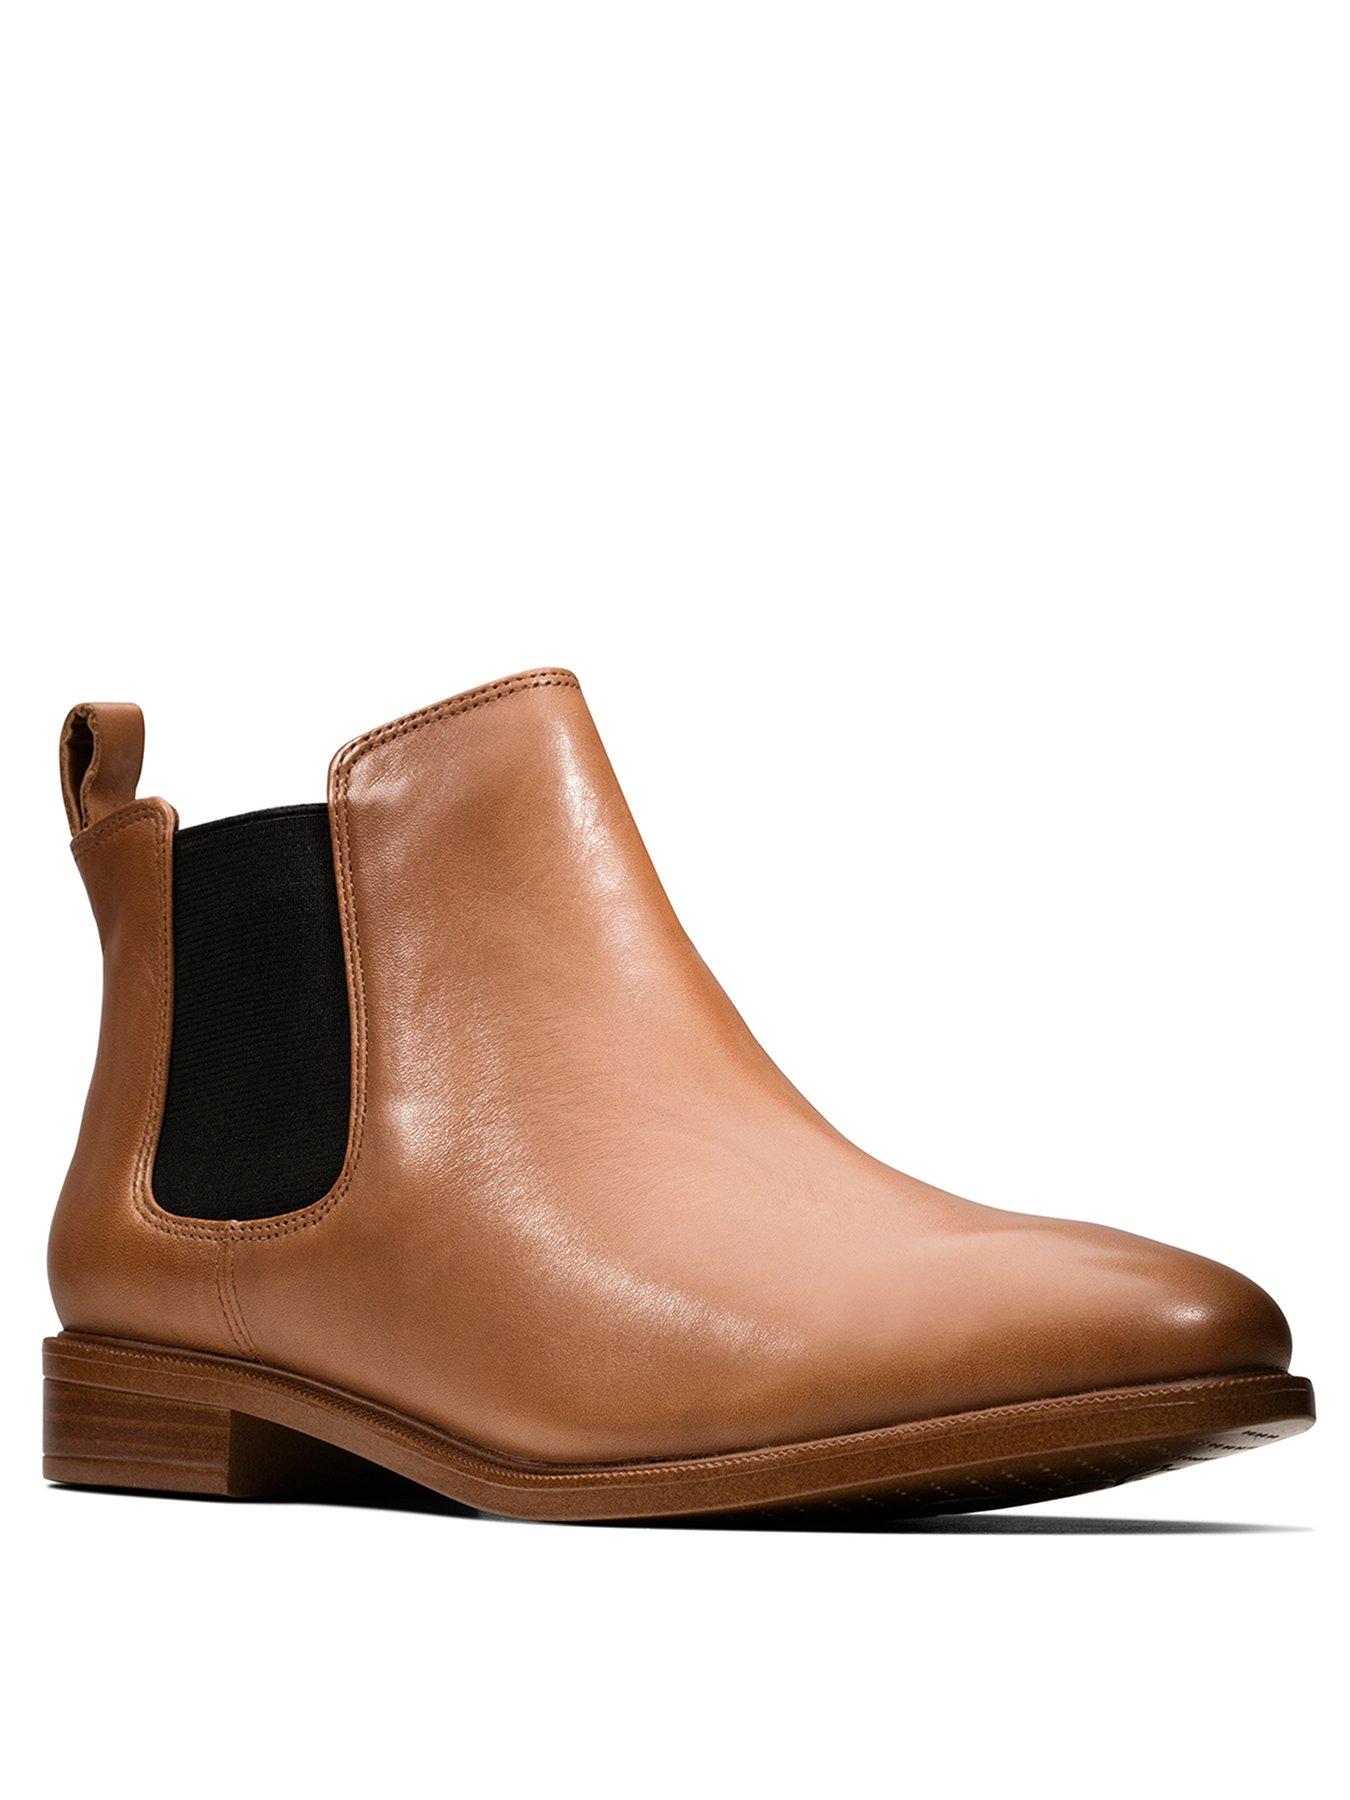 clarks wide fit boots